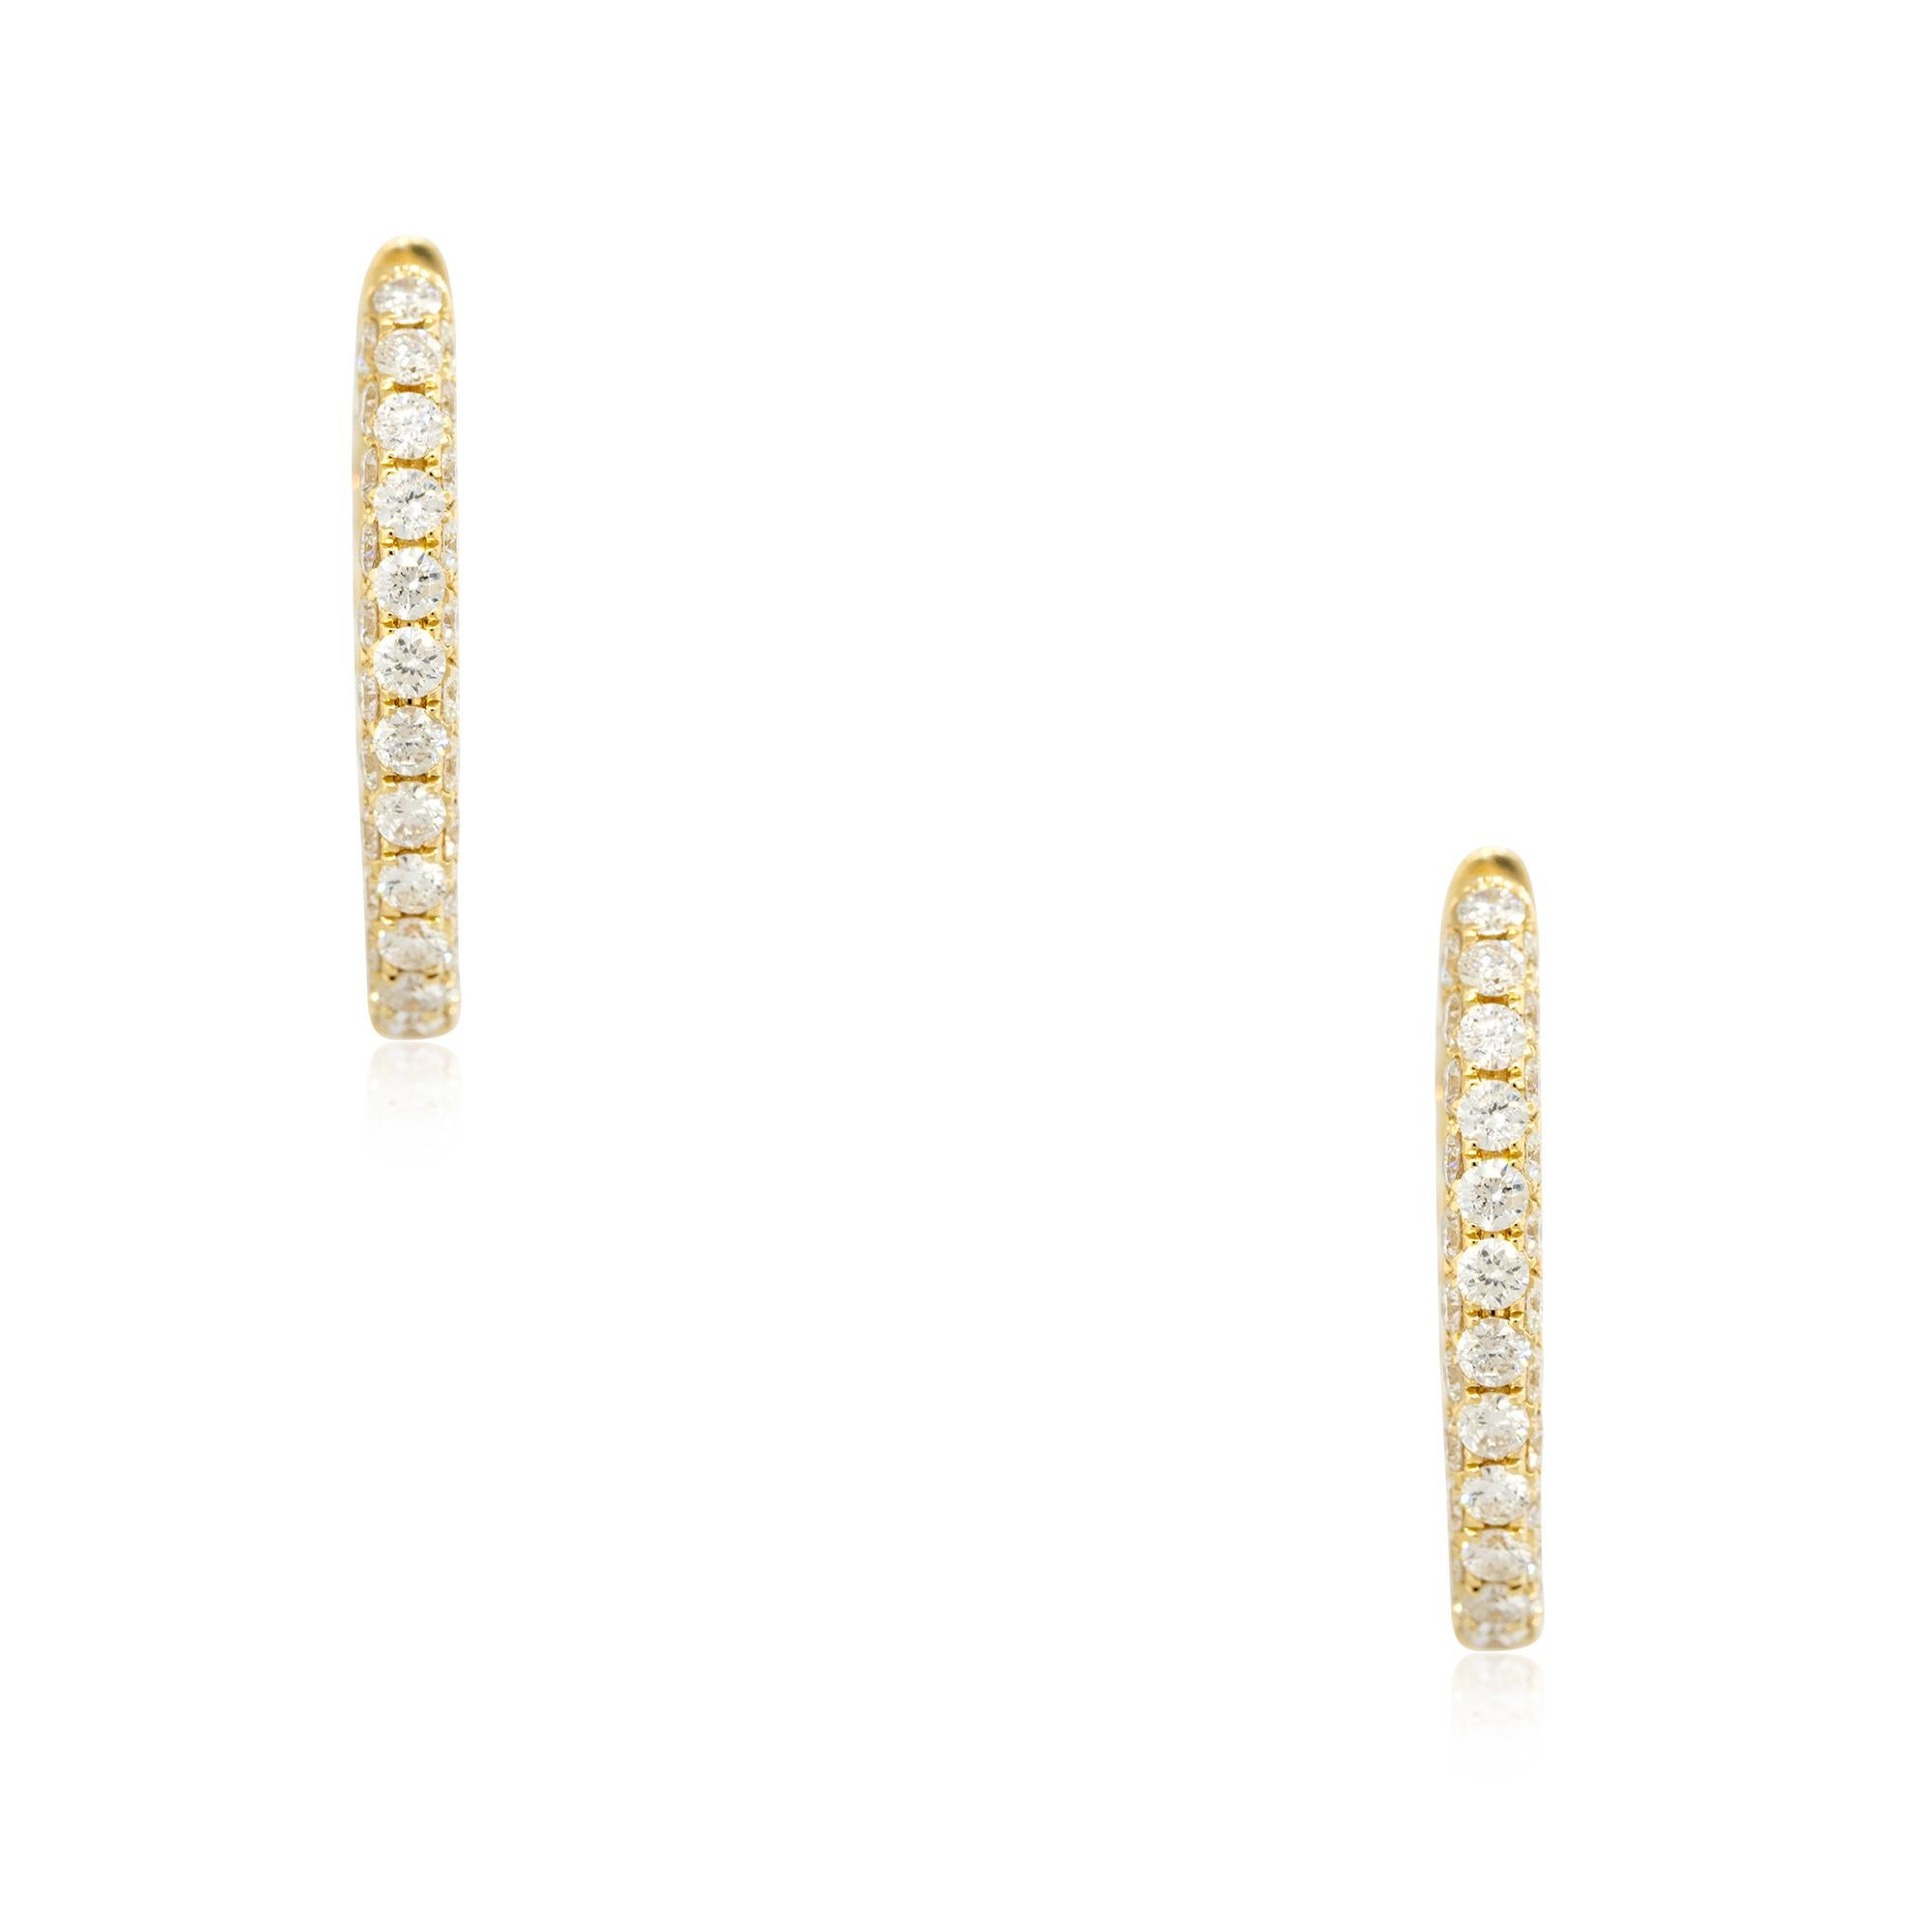 18k Yellow Gold 3.79ctw Round Brilliant Diamond Hoop Earrings
Material: 18k Yellow Gold
Diamond Details: Approximately 3.79ctw of Round Brilliant cut Diamonds. Diamonds are set in rows across 3 sides of the hoop earrings. The diamonds are not set